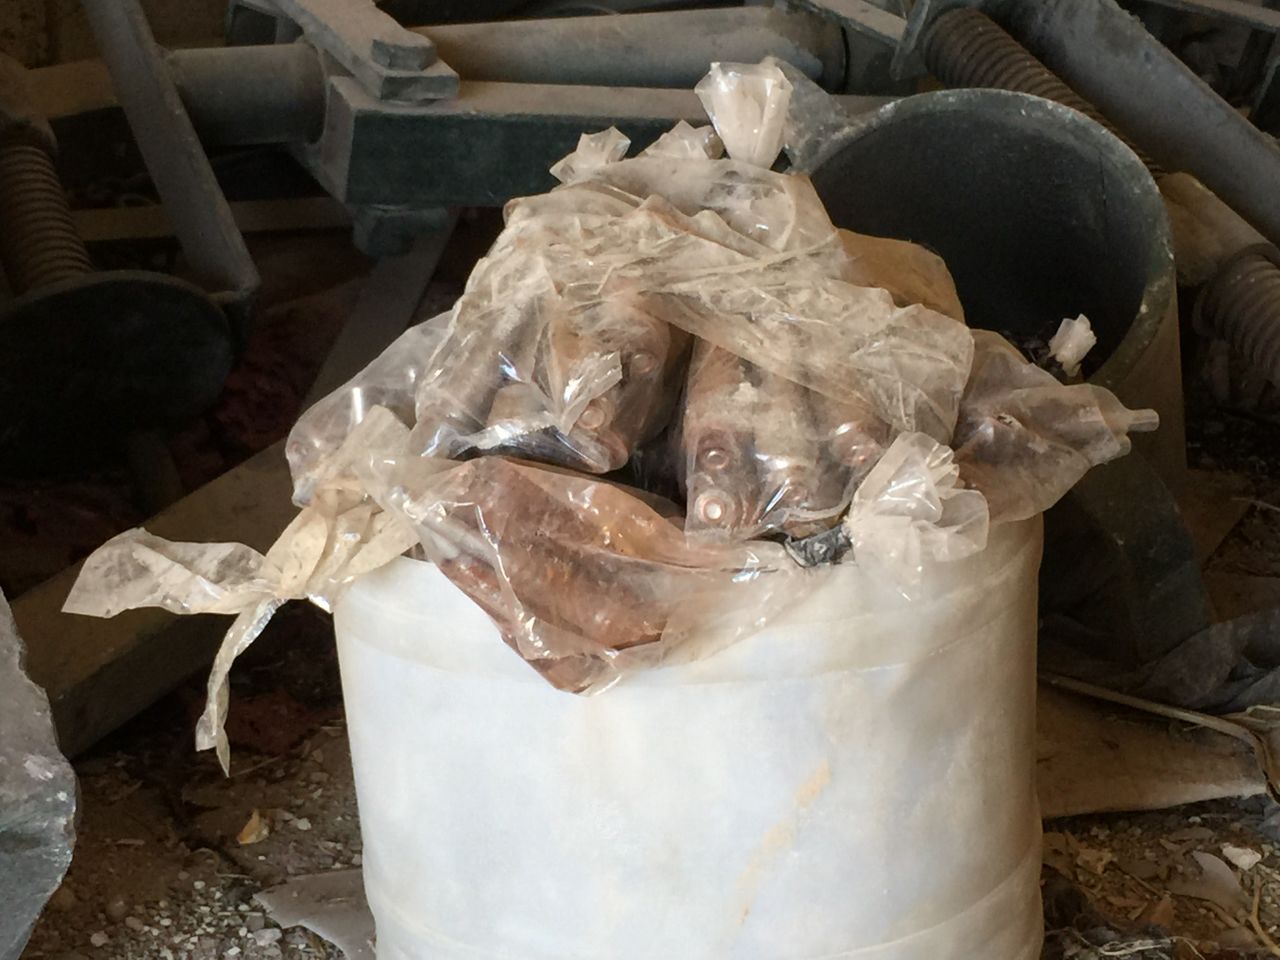 ISIS detonator caps, part of the cache of explosives and weapons discovered by Kurdish troops in Tal Abyad.  